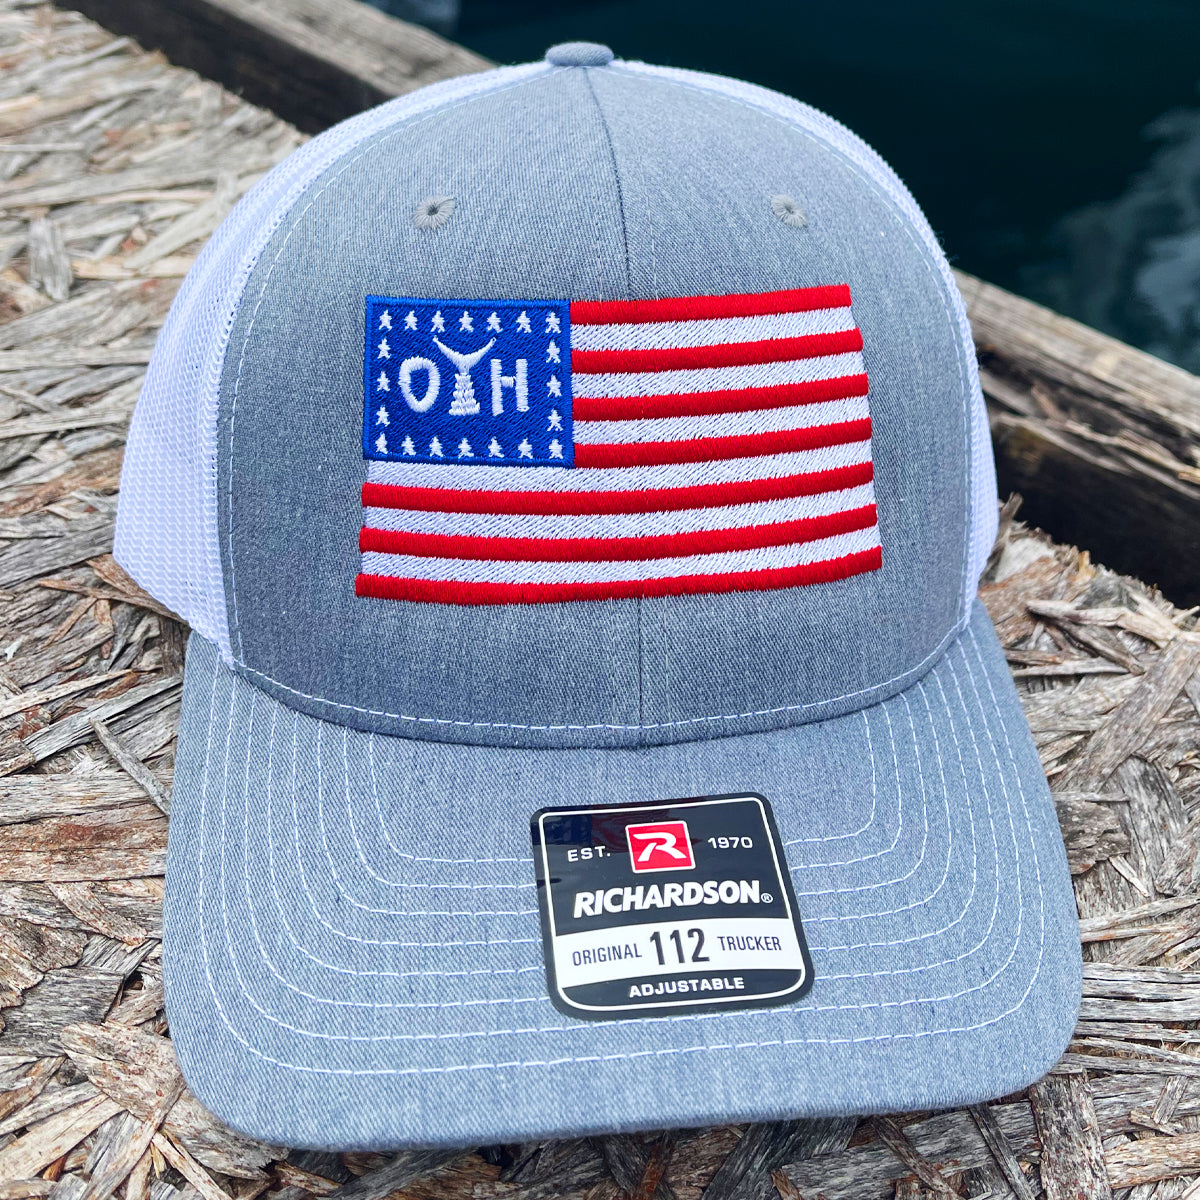 O.T.H. Adjustable Trucker Hat - Grey & White with Flag